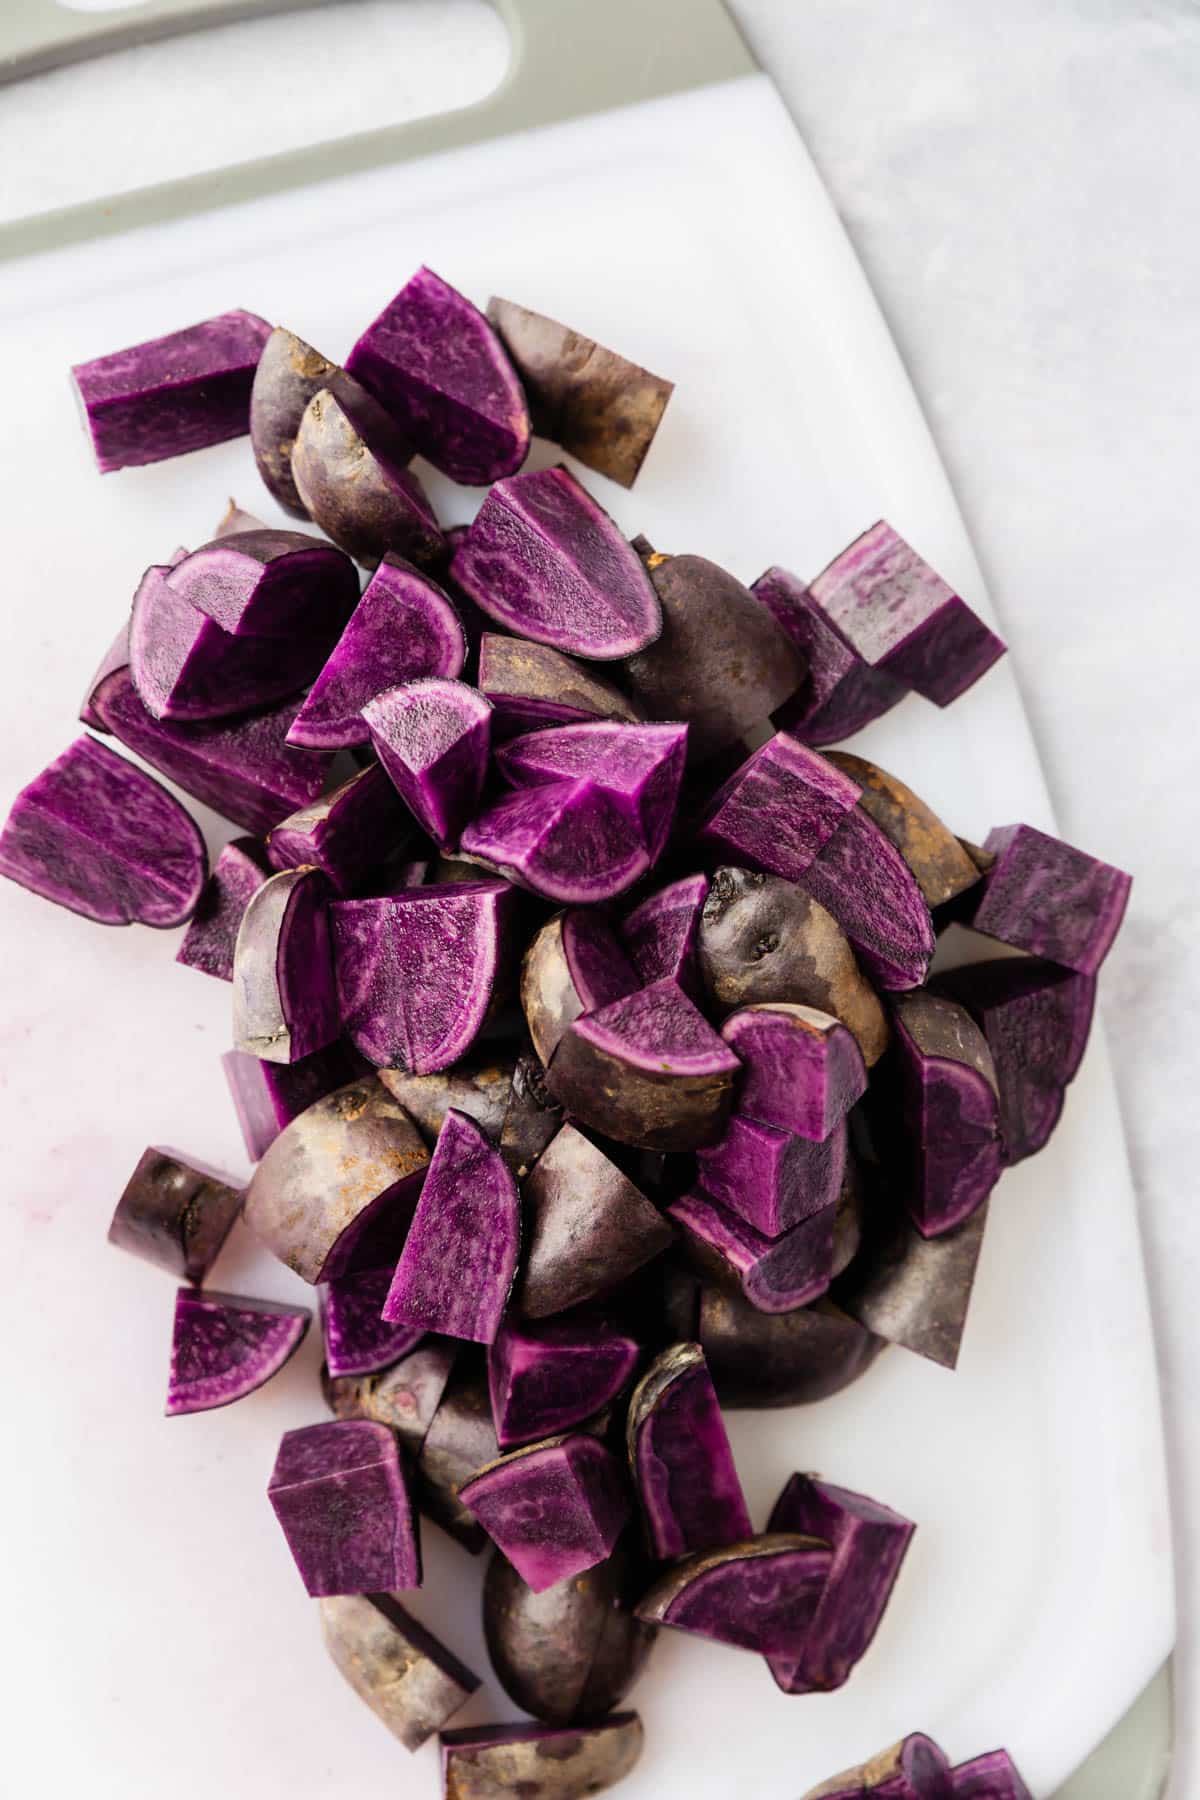 Baby purple potatoes diced on a white cutting board.